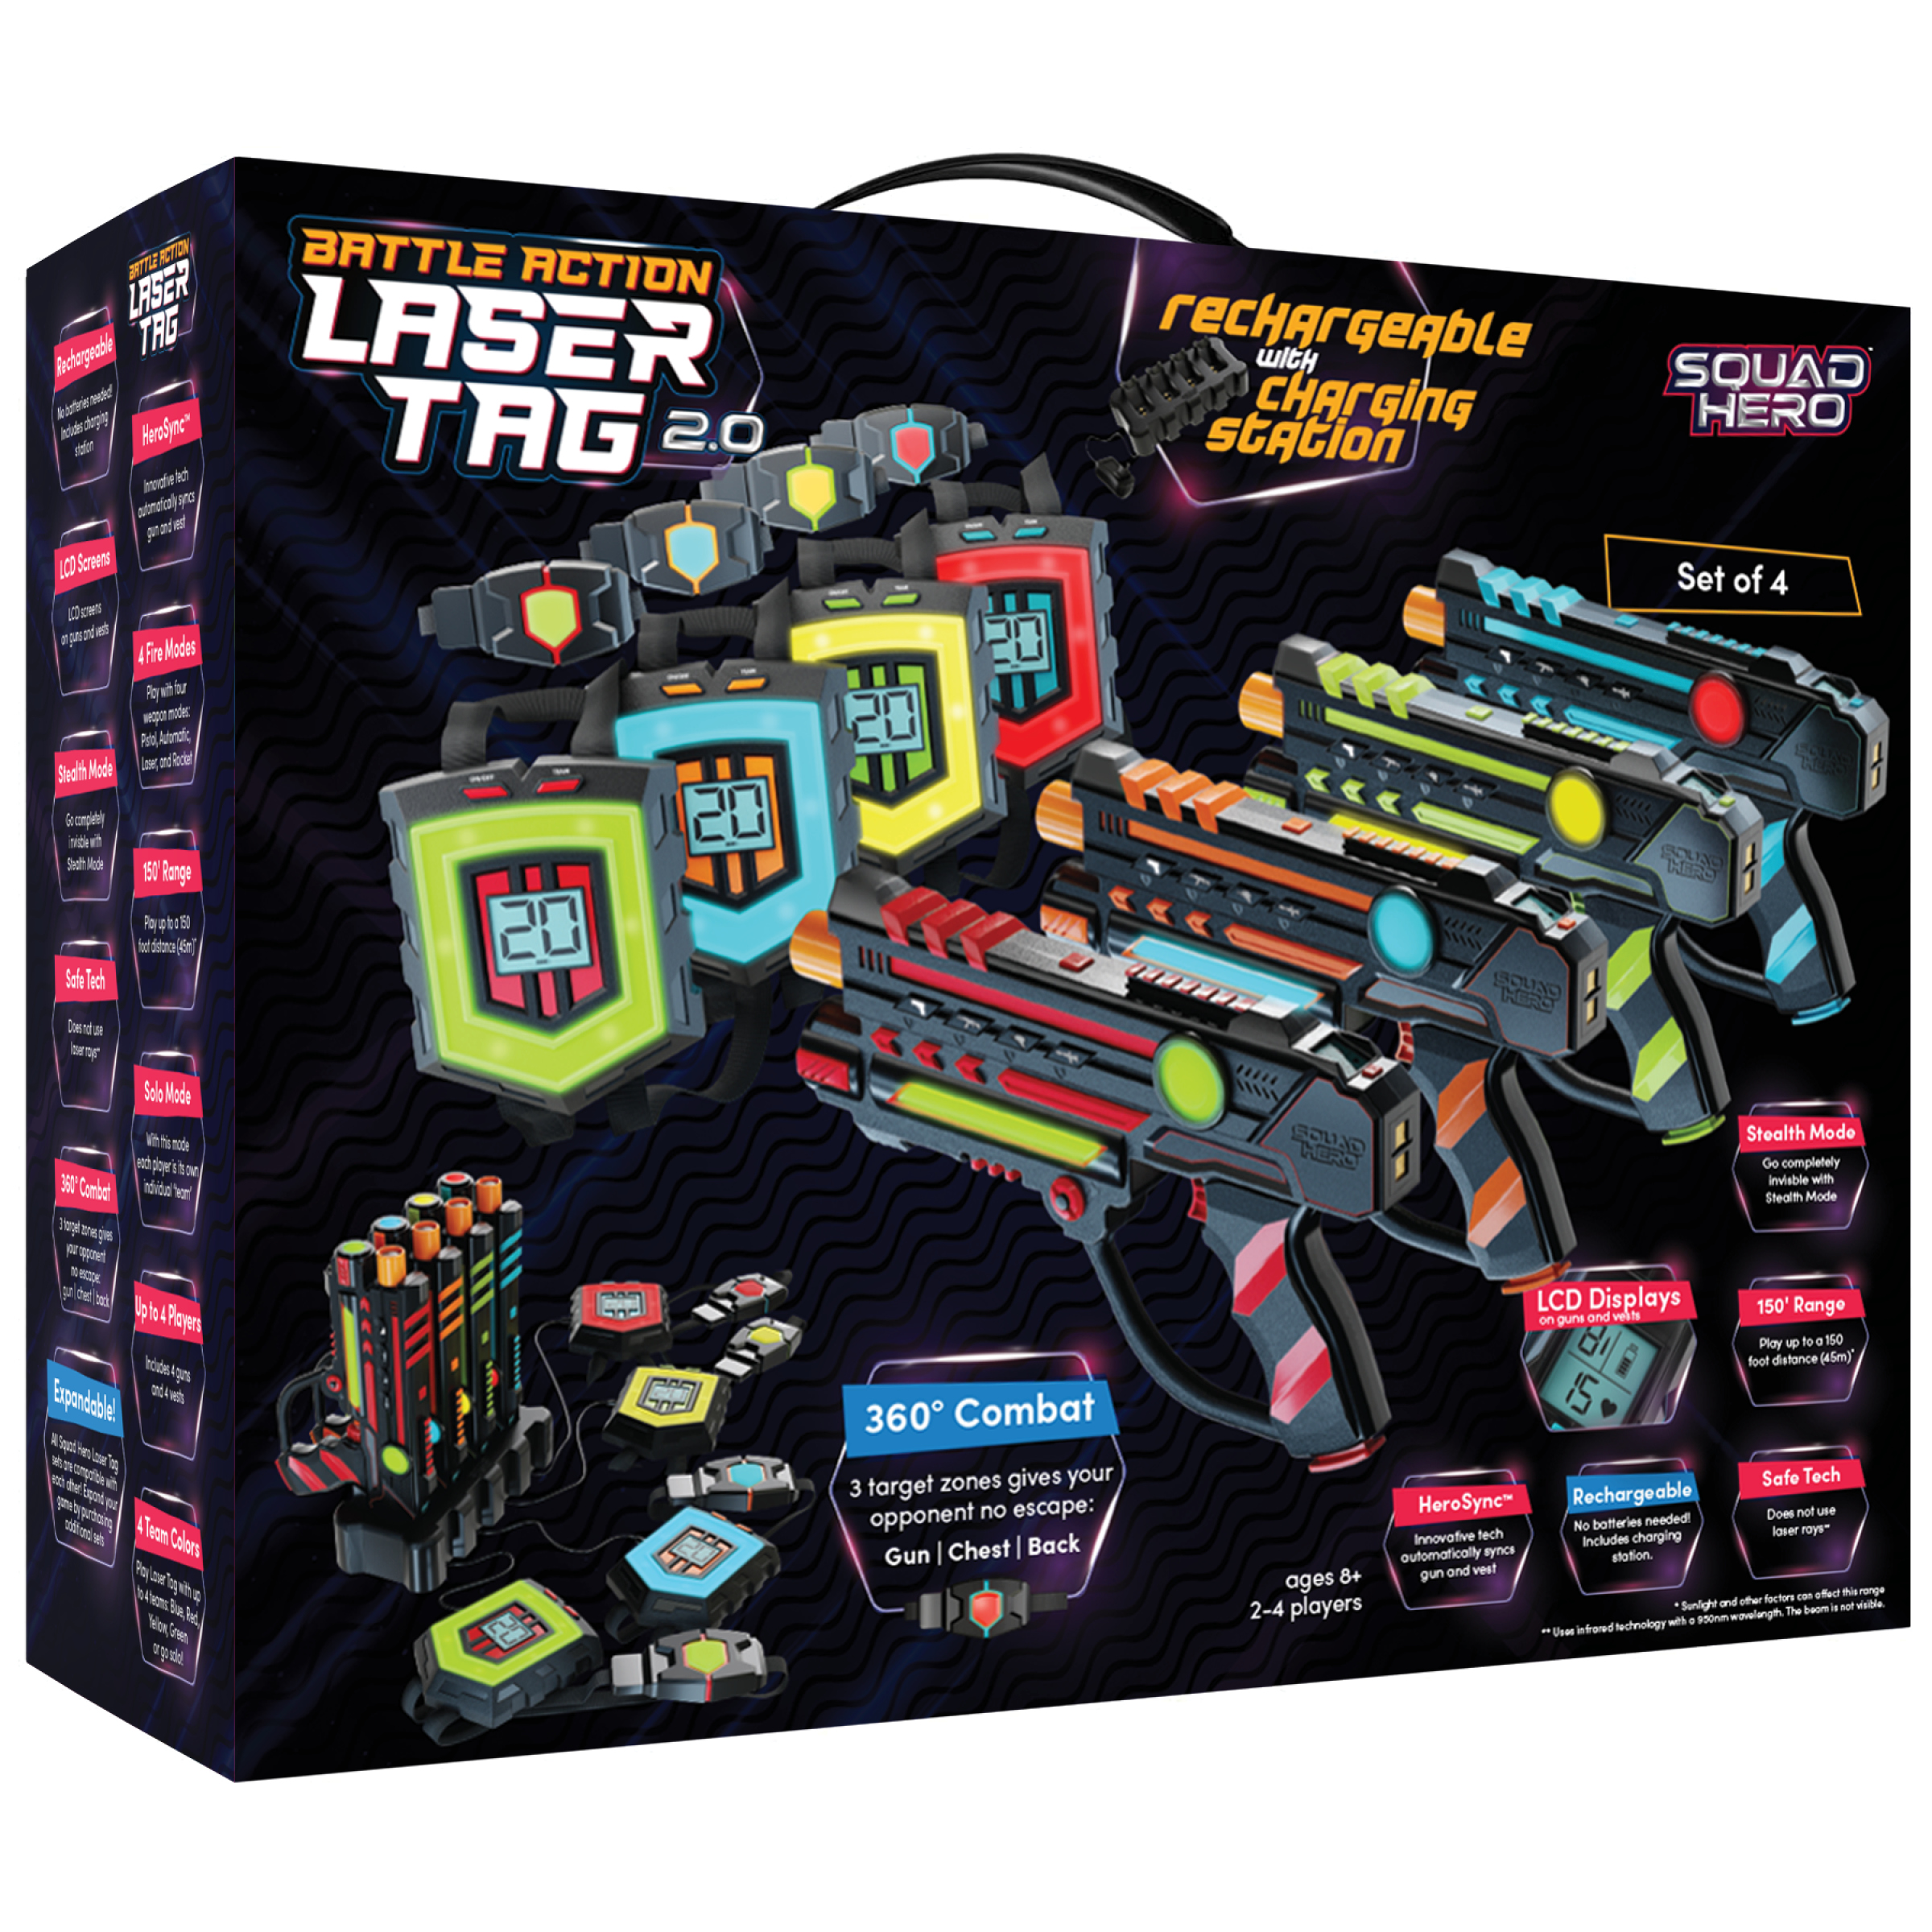 Squad Hero Ultimate Rechargeable Laser Tag 2.0 Set - 4 Infrared Guns & Vests, LCDs, Sensor Sync - Fun Game for Kids, Teens & Adults - Innovative Gaming Experience - image 1 of 9